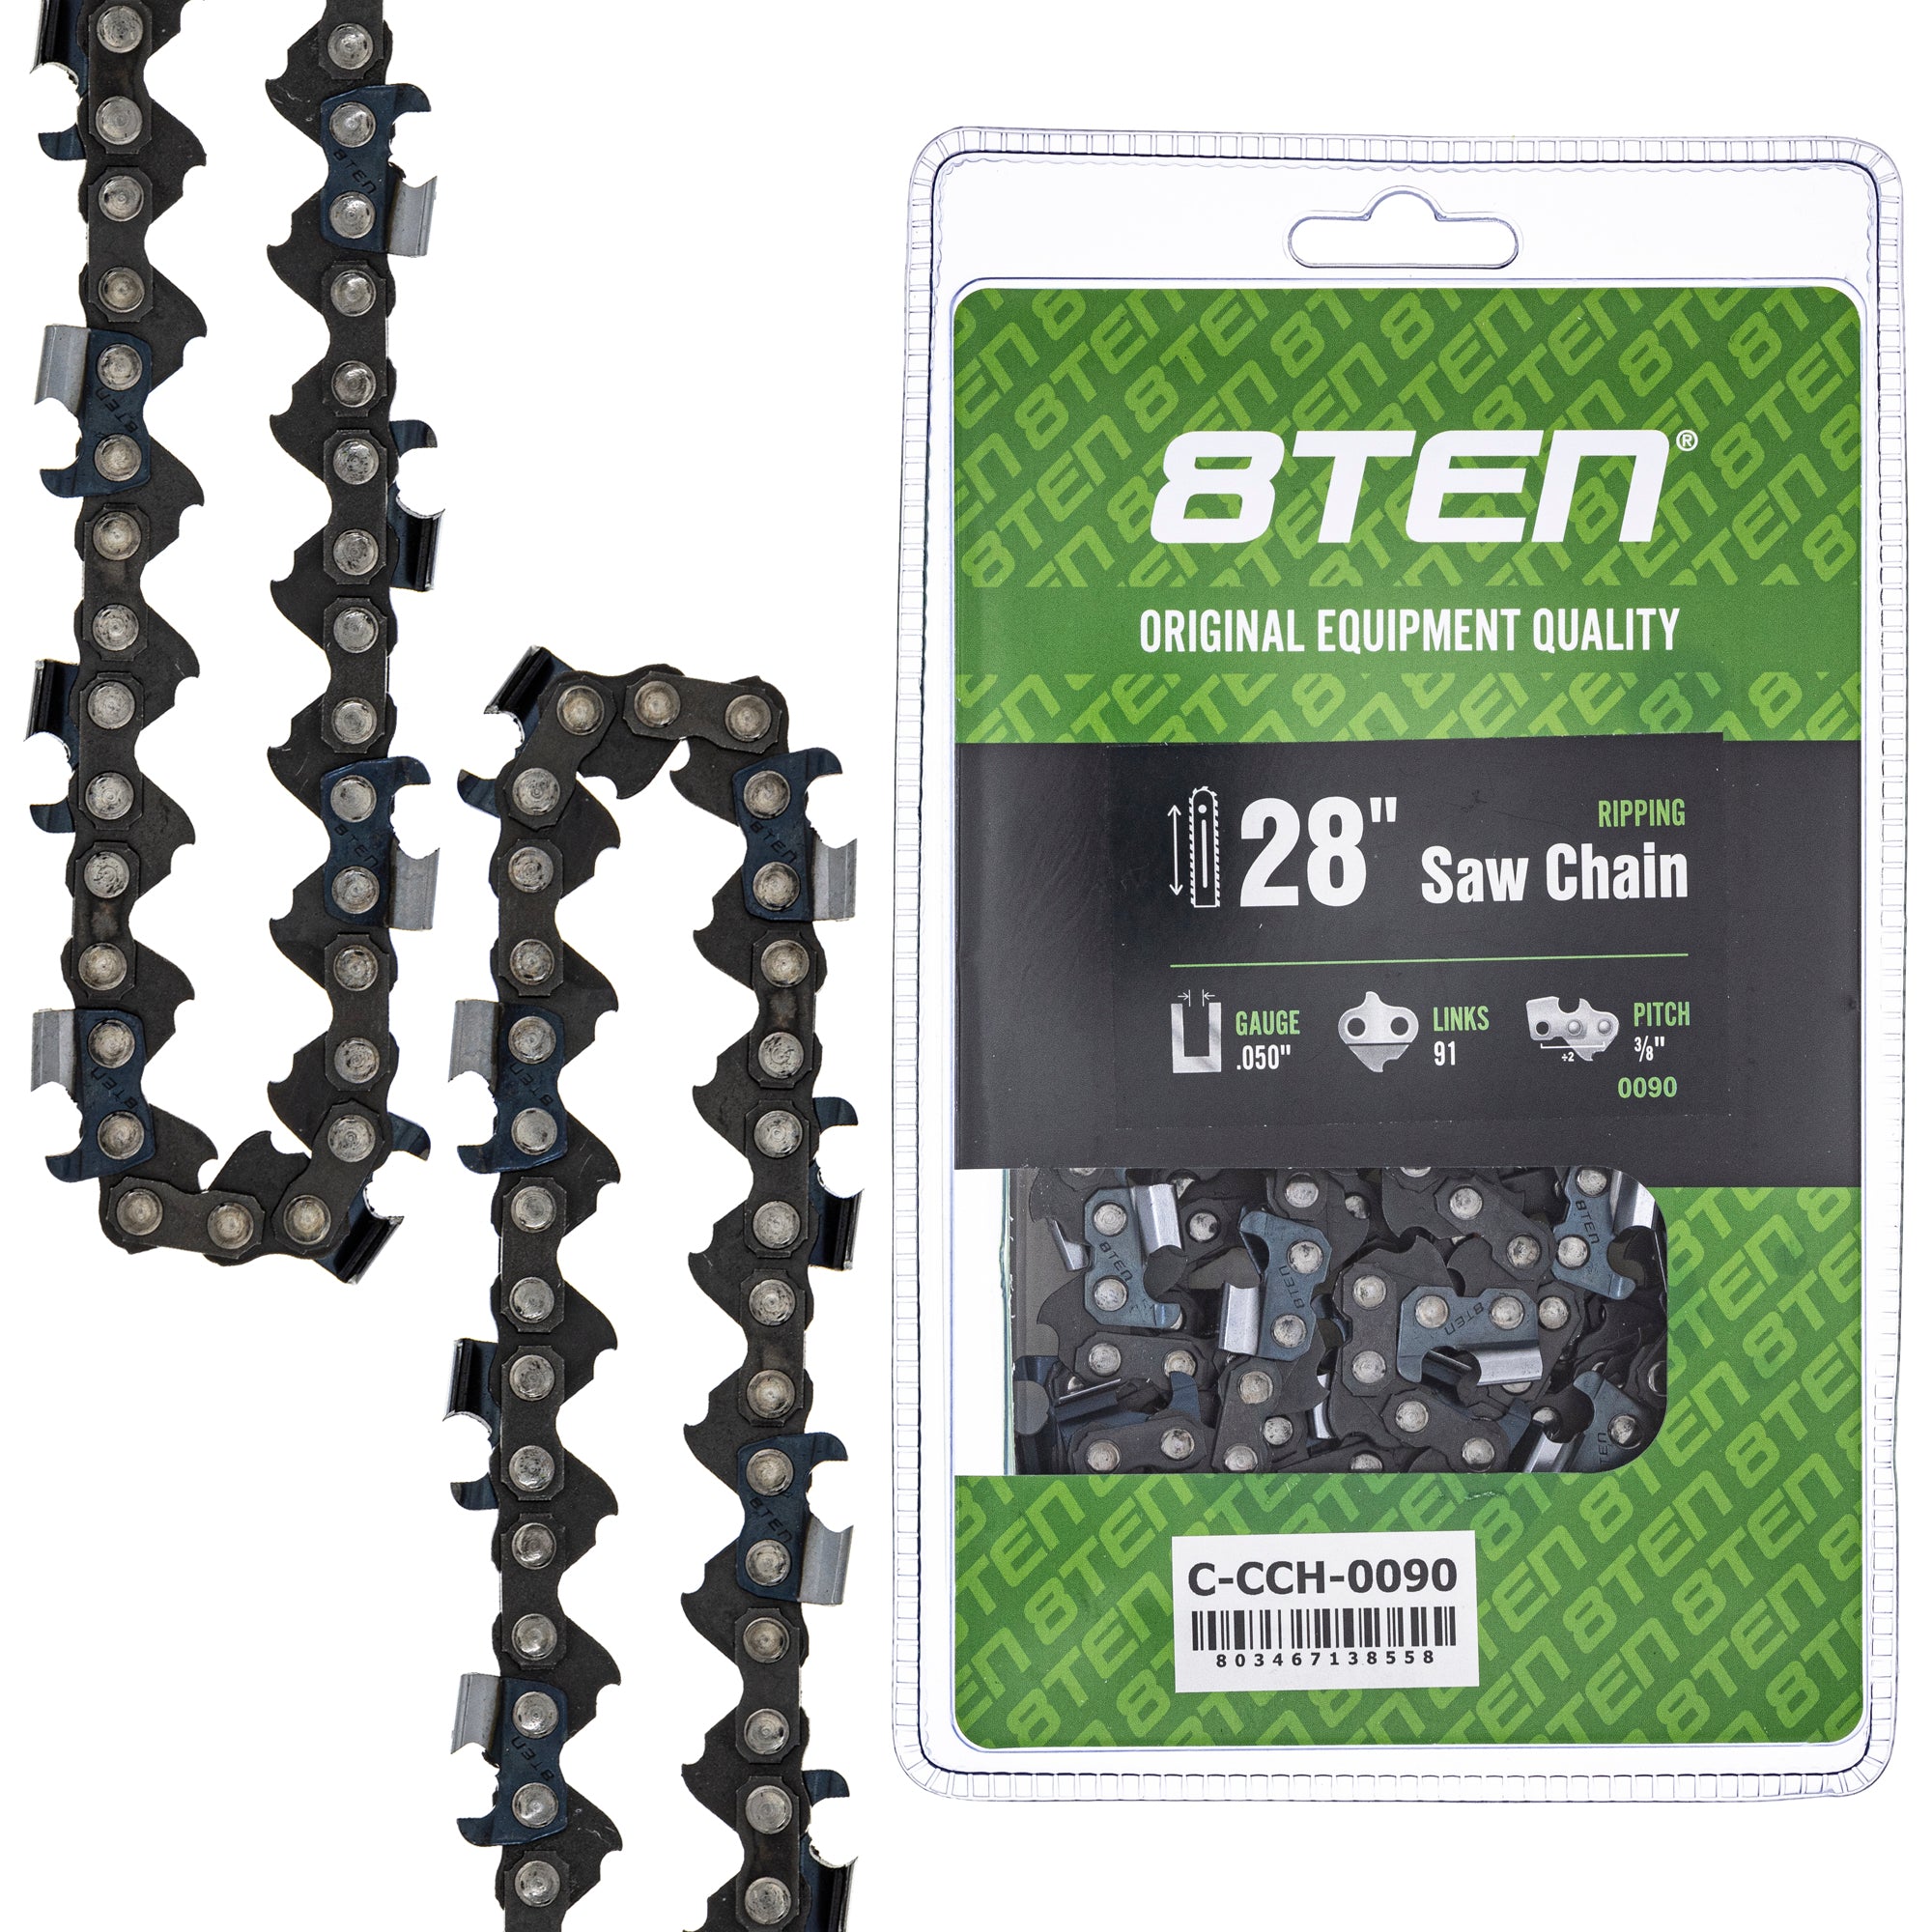 Chainsaw Chain 28 Inch .050 3/8 91DL for zOTHER Oregon MS 066 064 056 8TEN 810-CCC2212H